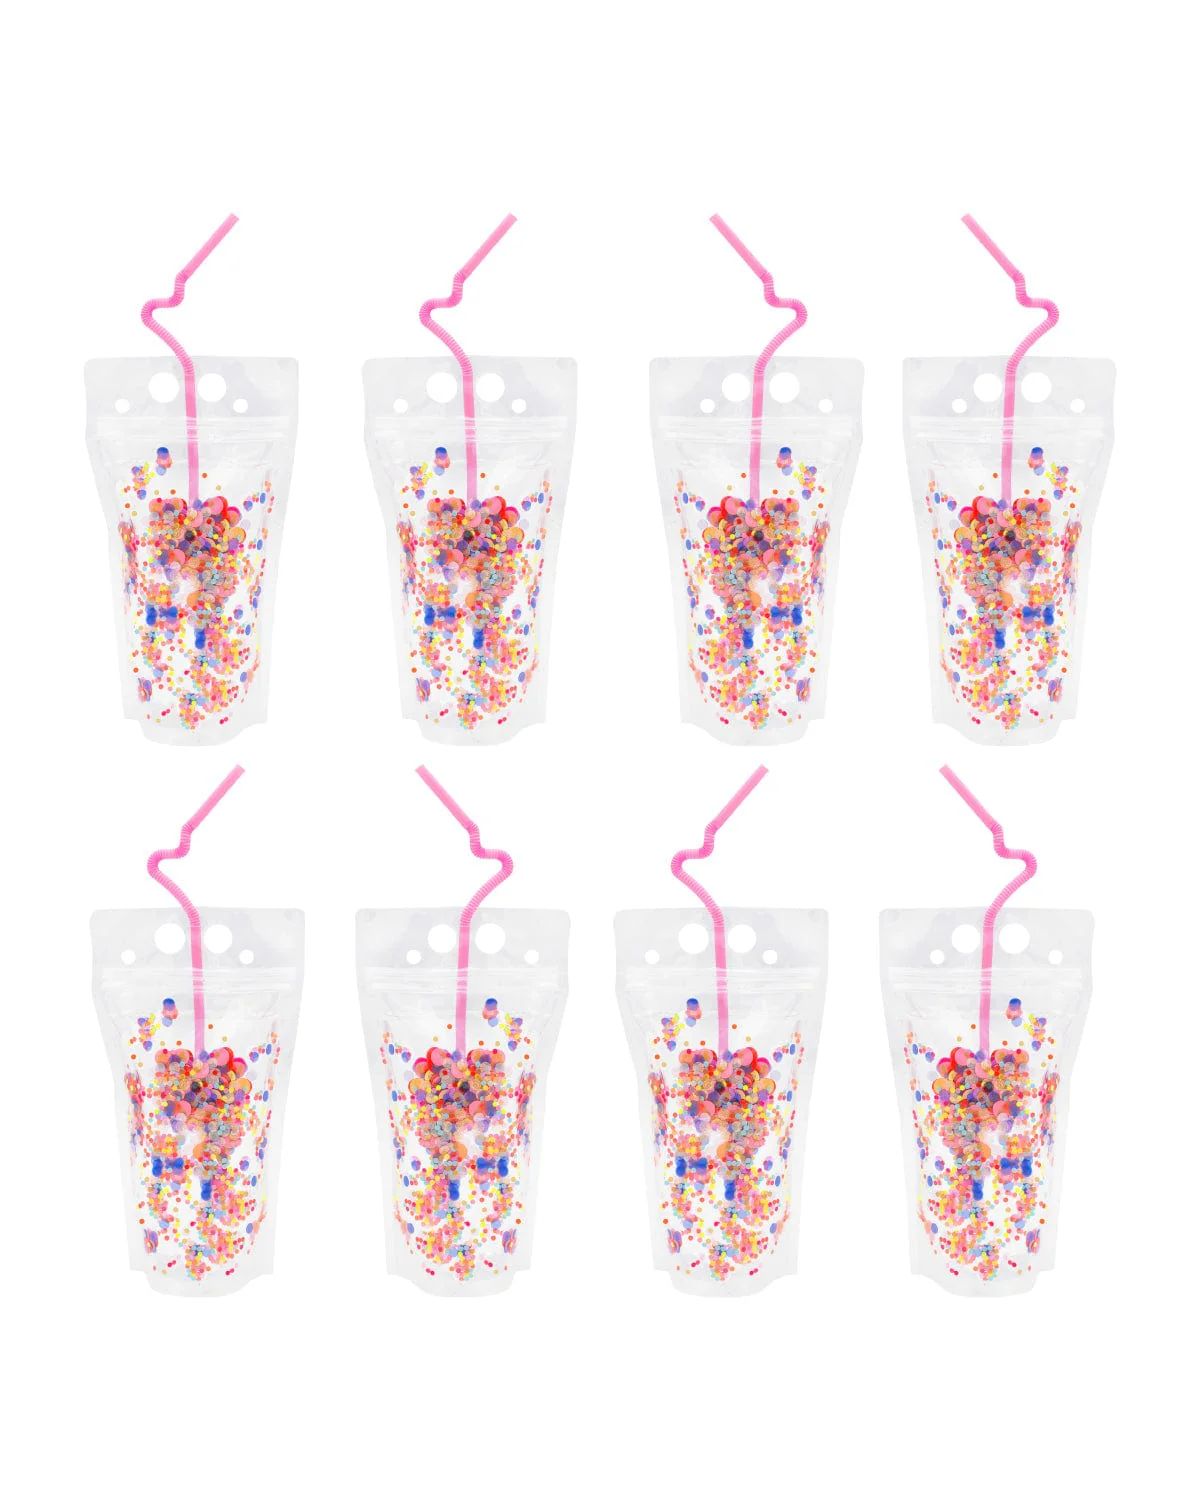 Say Cheers Reusable Confetti Hydration Pouches | Packed Party